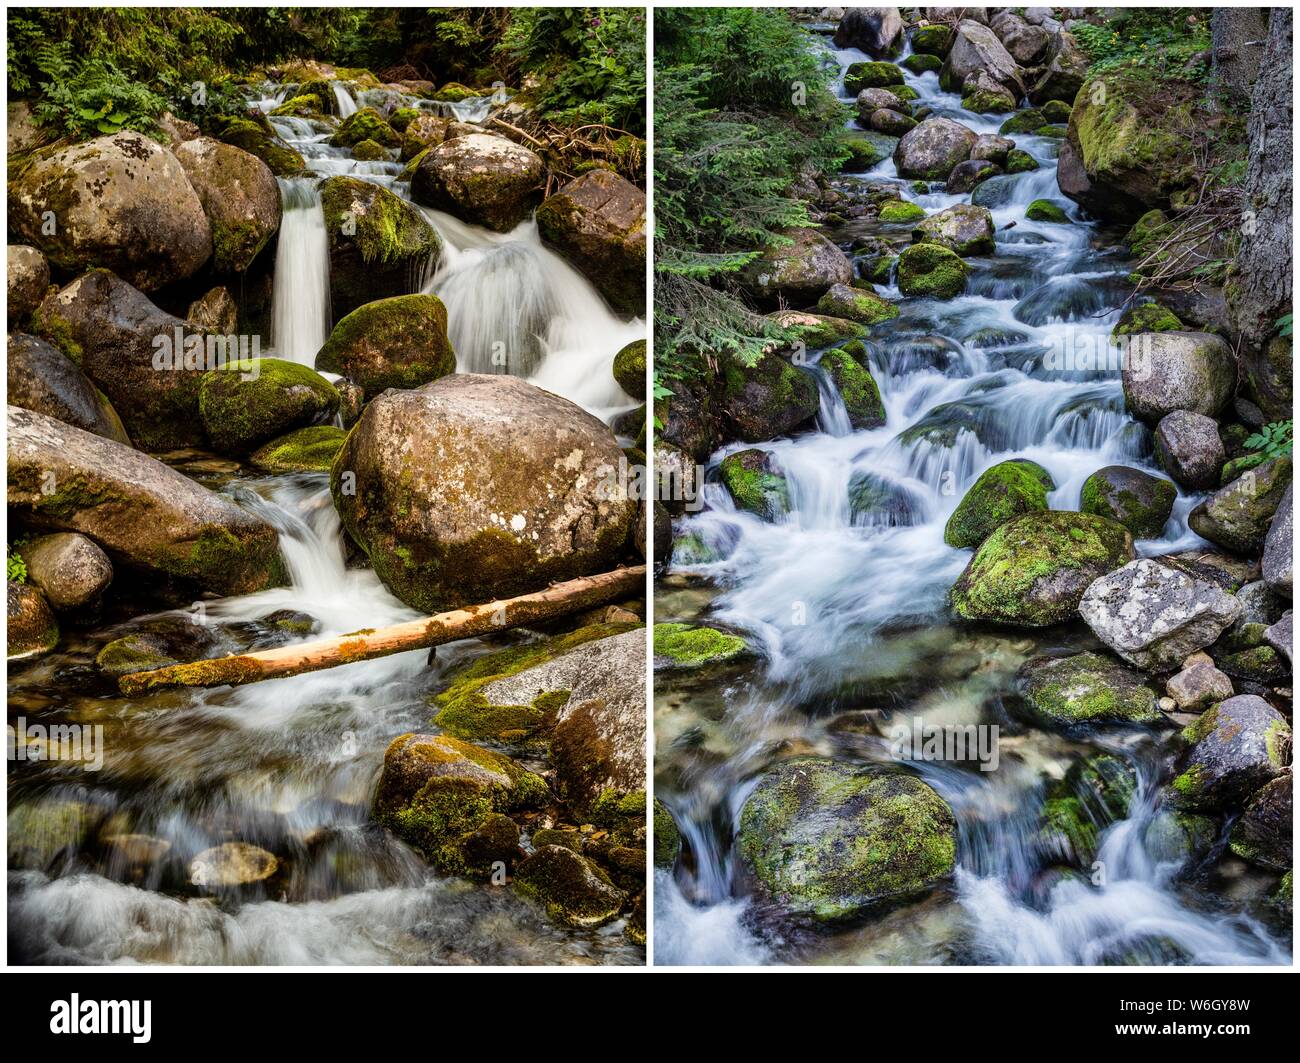 Picture of 2 streams composed to be combined in one picture. This is shot on Rila mountain in Bulgaria while on hike to Musala peak.. Stock Photo